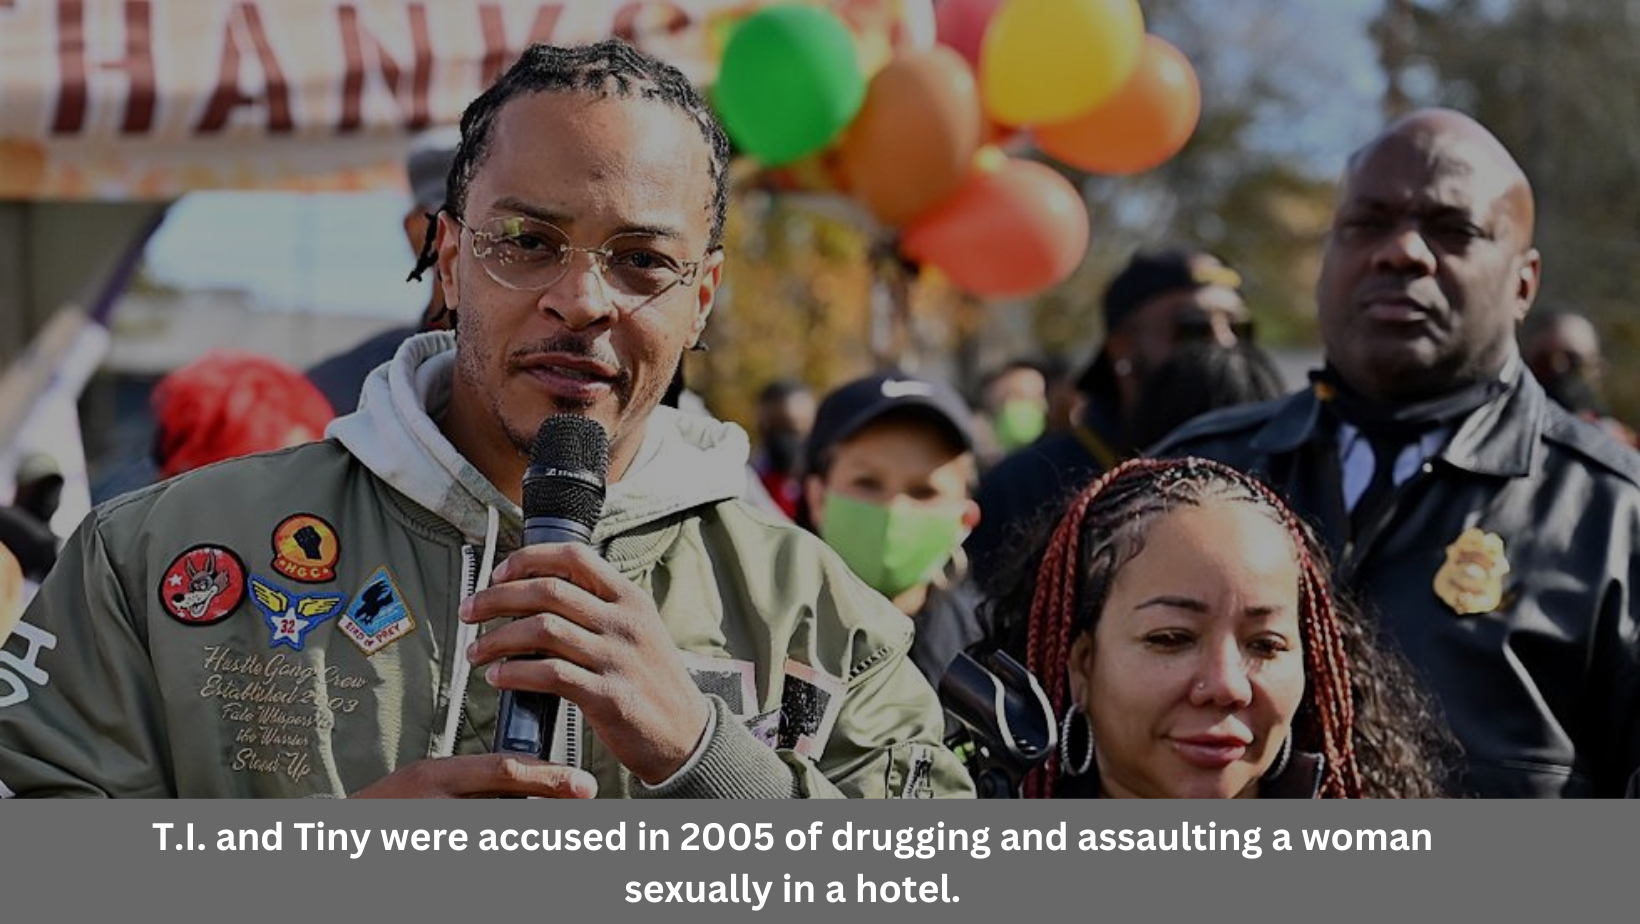 T.I. and Tiny were accused in 2005 of drugging and assaulting a woman sexually in a hotel.